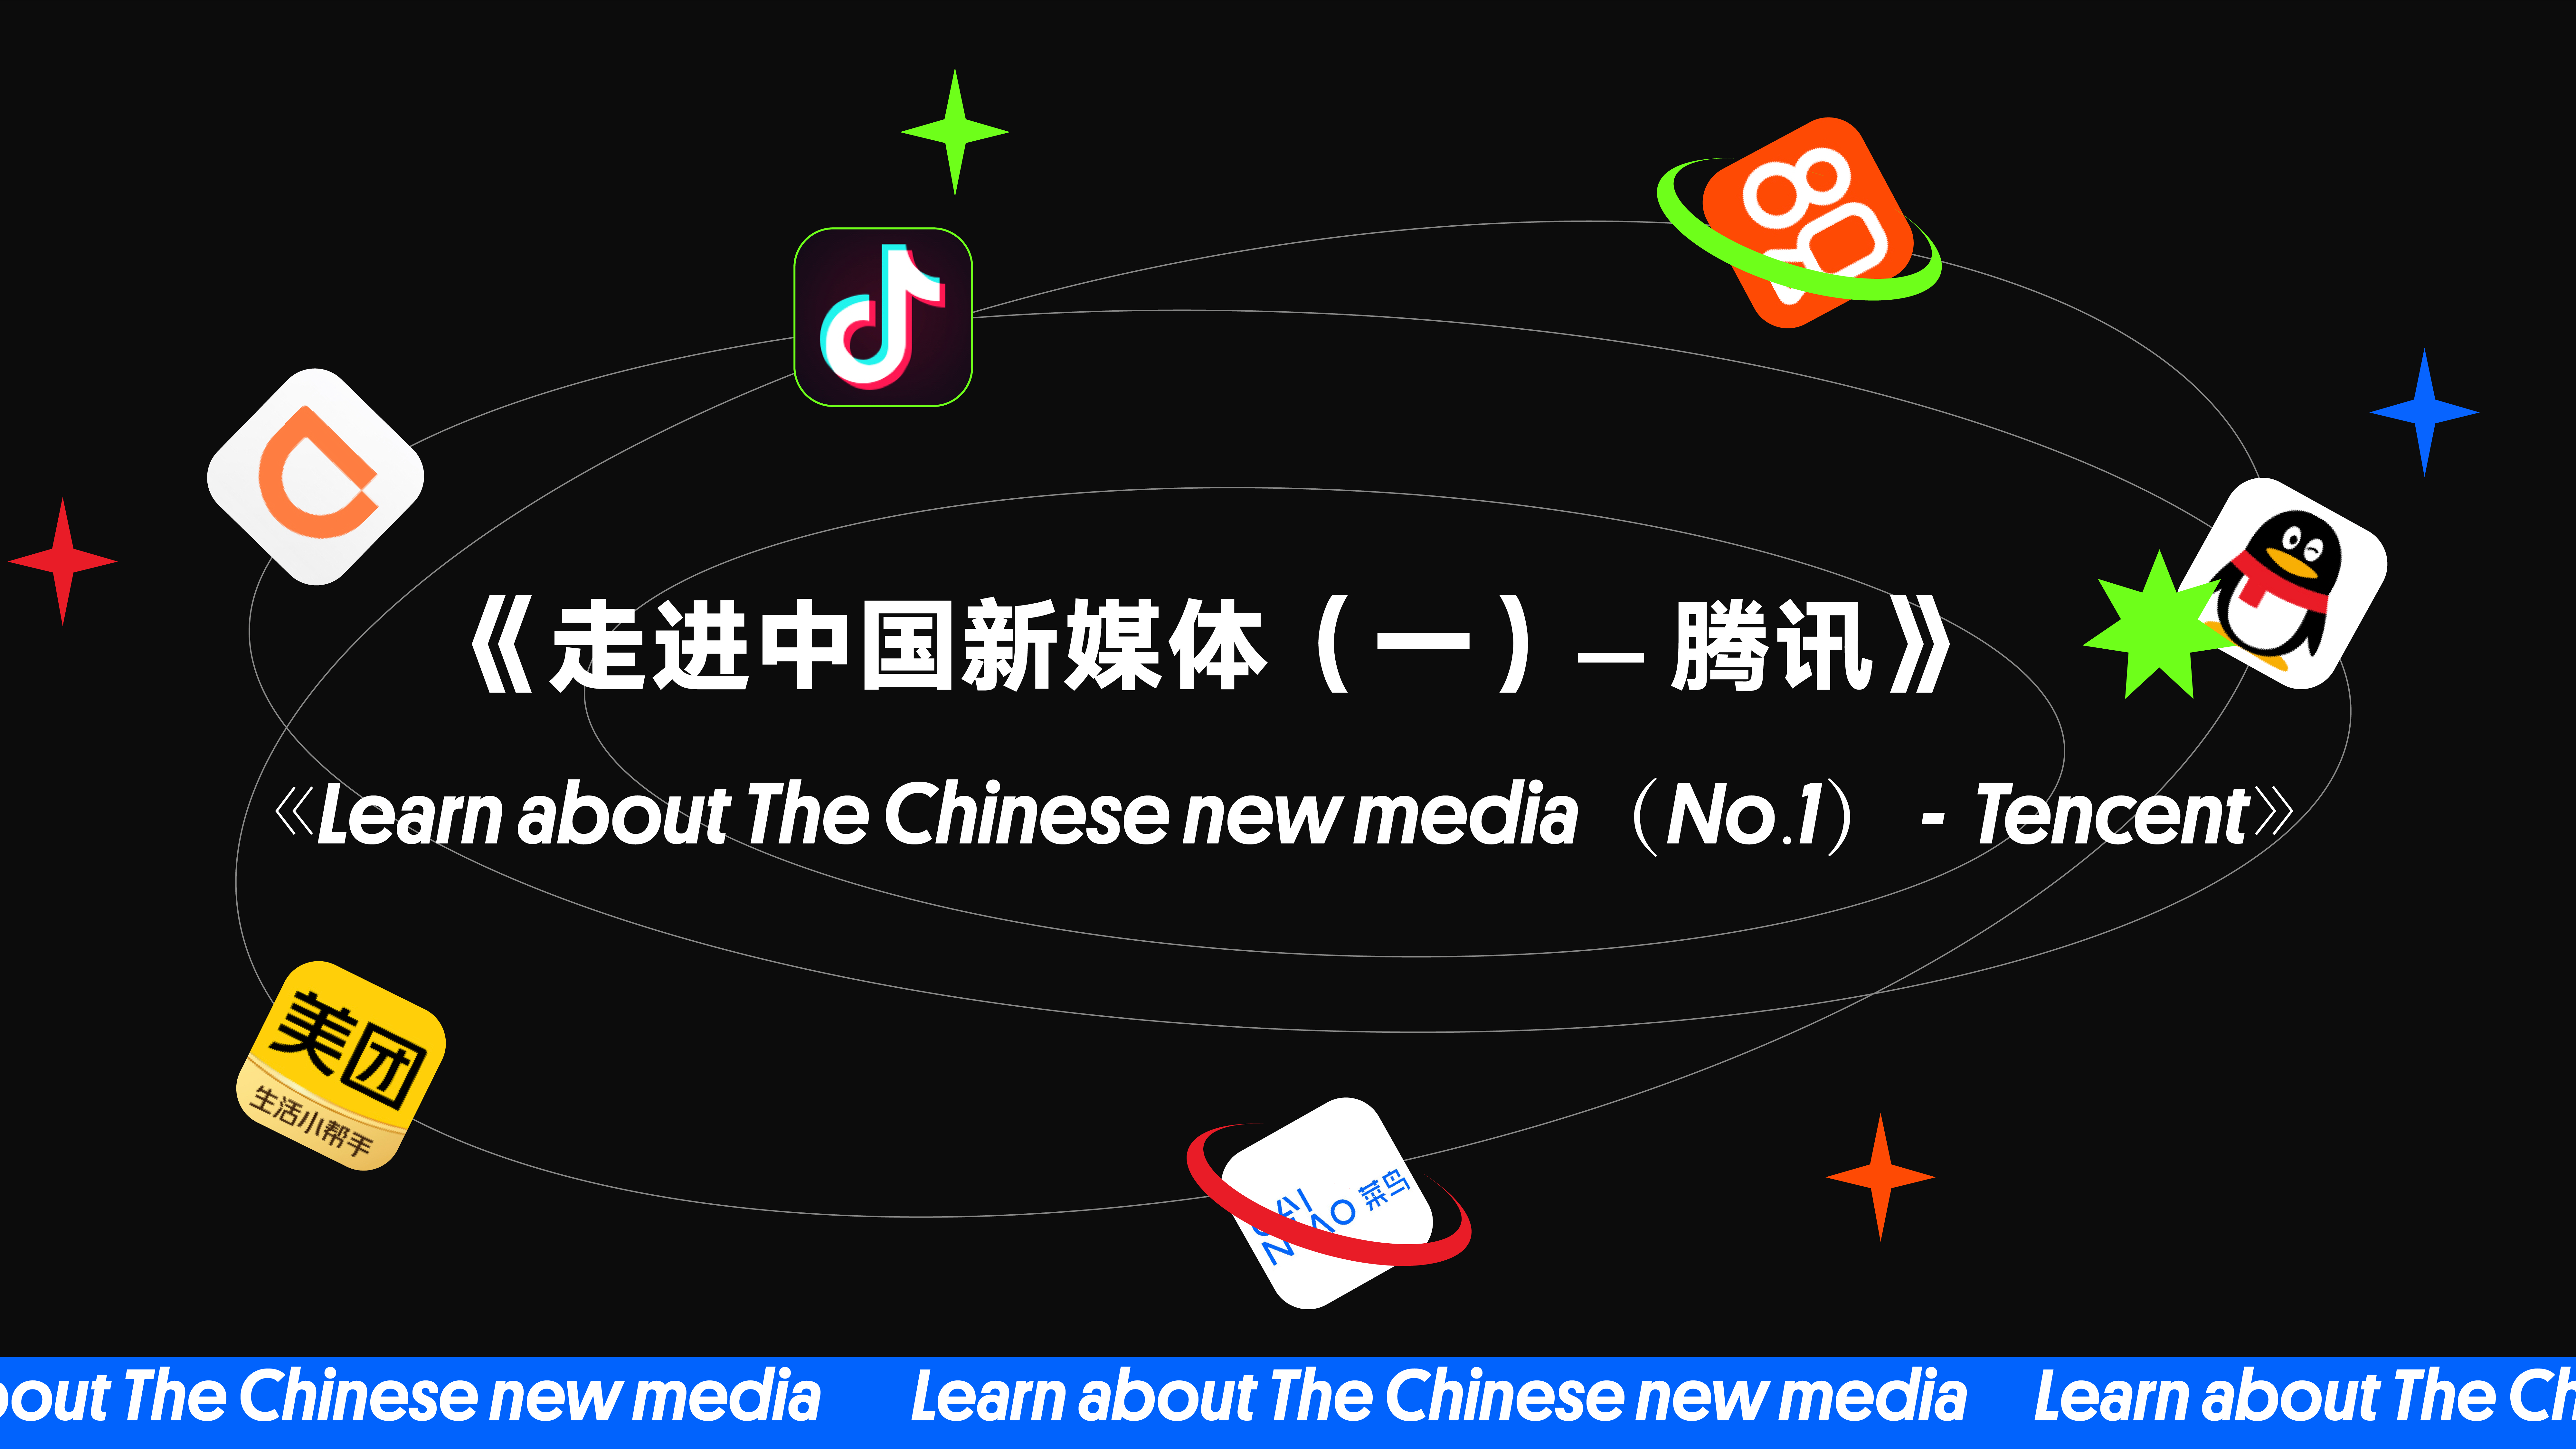 《Learn about The Chinese new media（No.1）— Tencent》